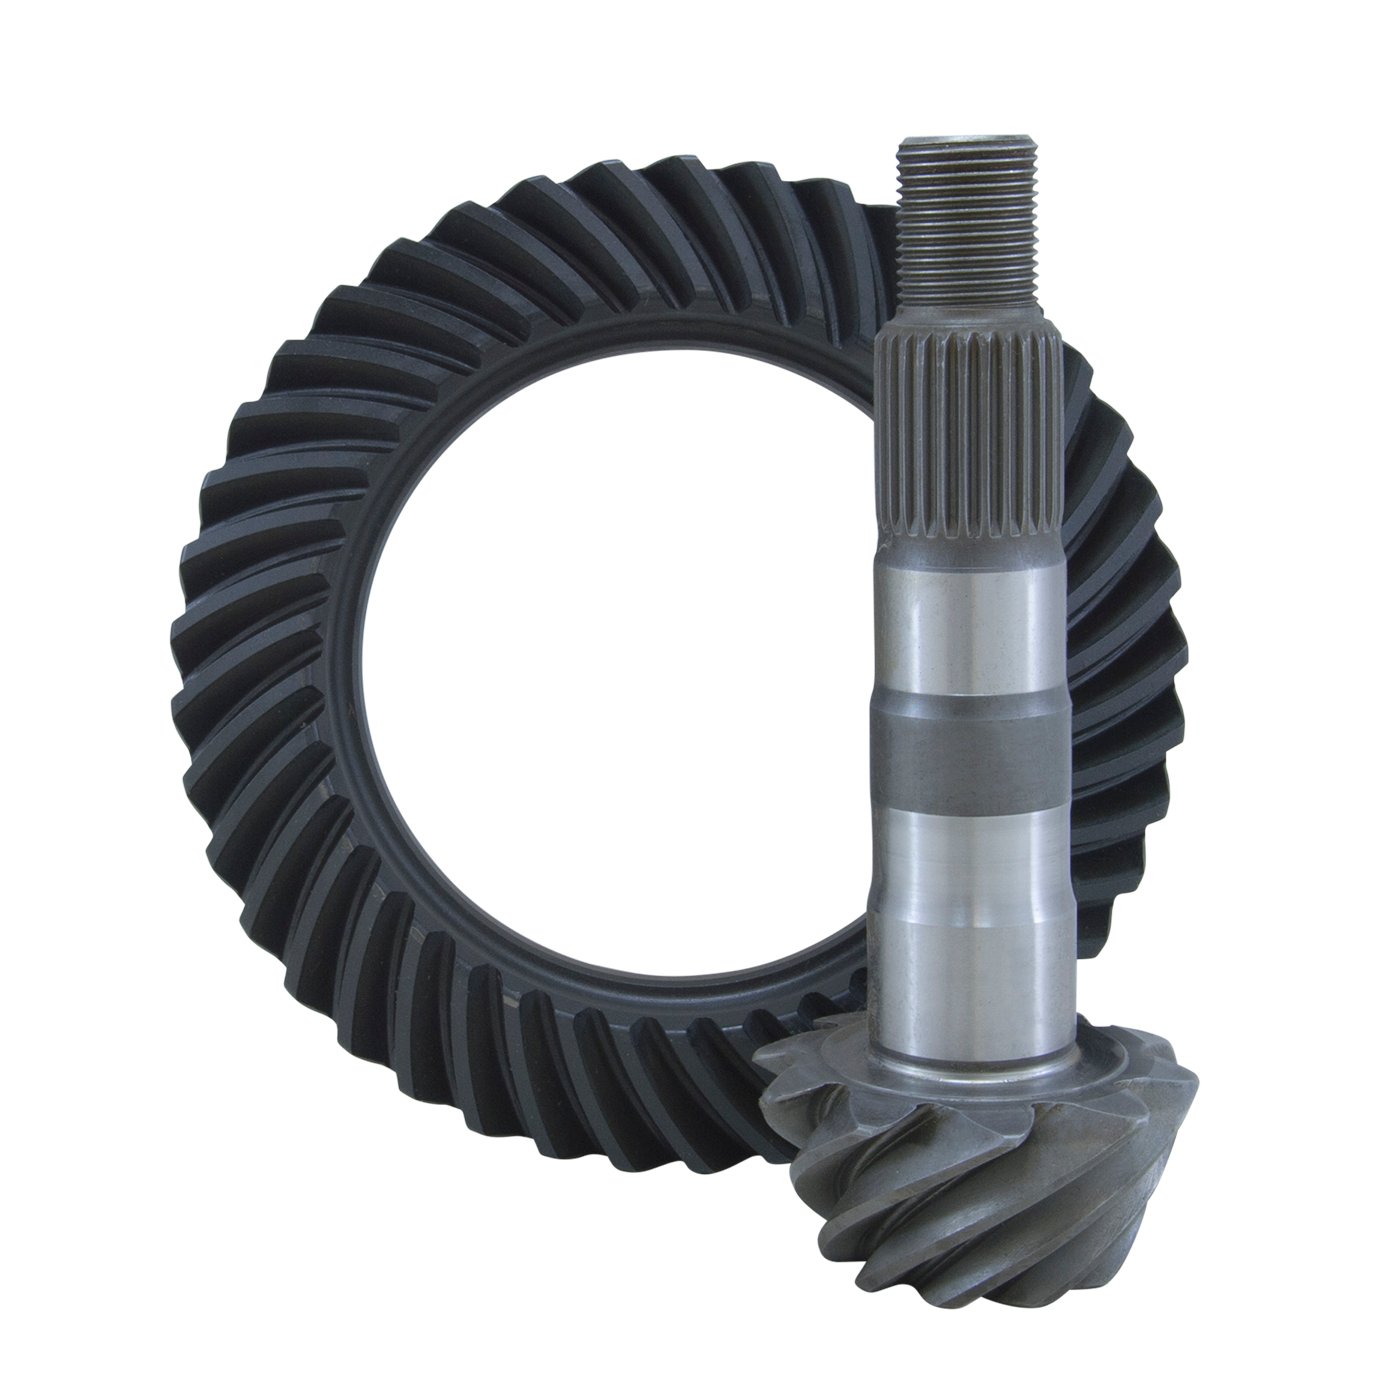 USA Standard 36447 Ring & Pinion Gear Set, For GM Ifs 7.2 in. (S10 & S15), 4.11 Ratio